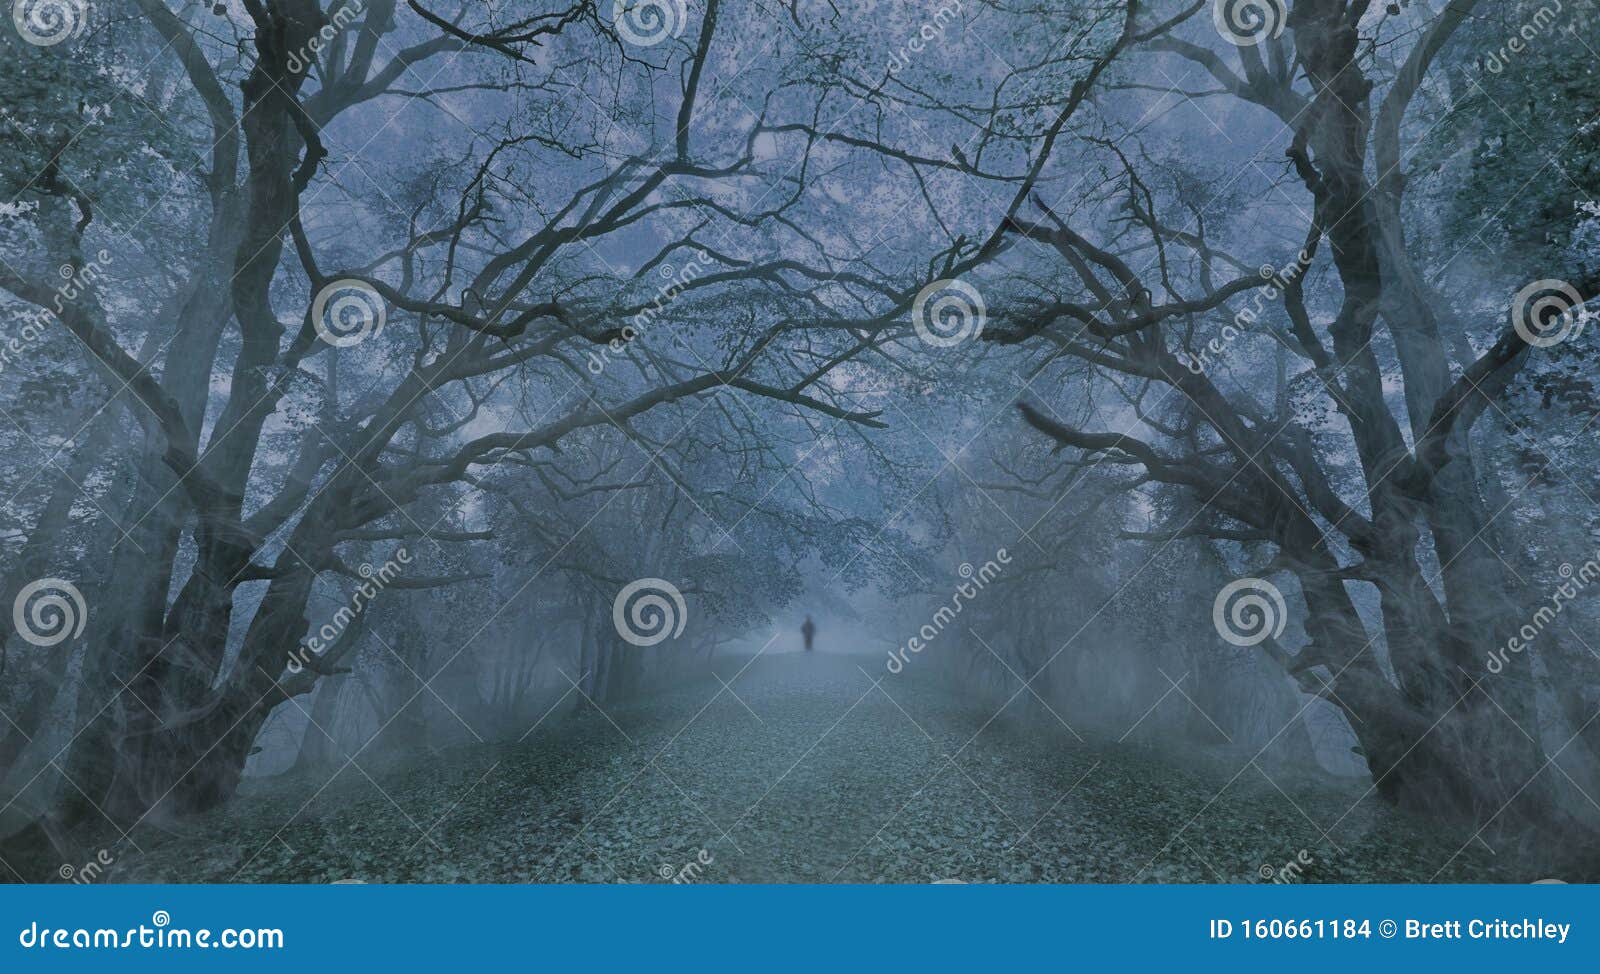 spooky halloween forest at night ghostly figure